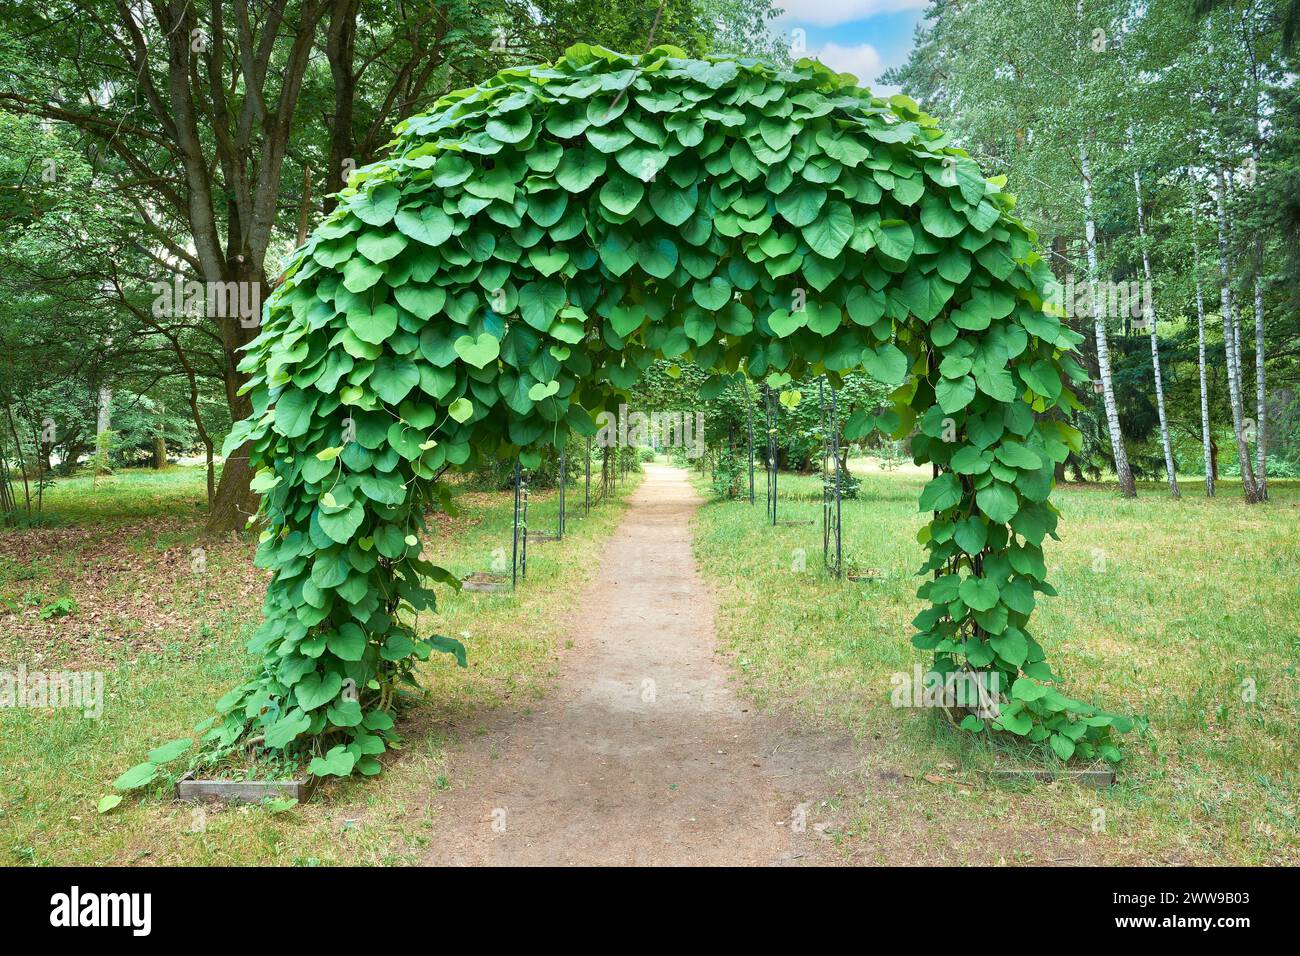 Arch of tropical jungle lianas, woody climbing vine. Alley with empty green arches, natural green corridor in summer park. Stock Photo